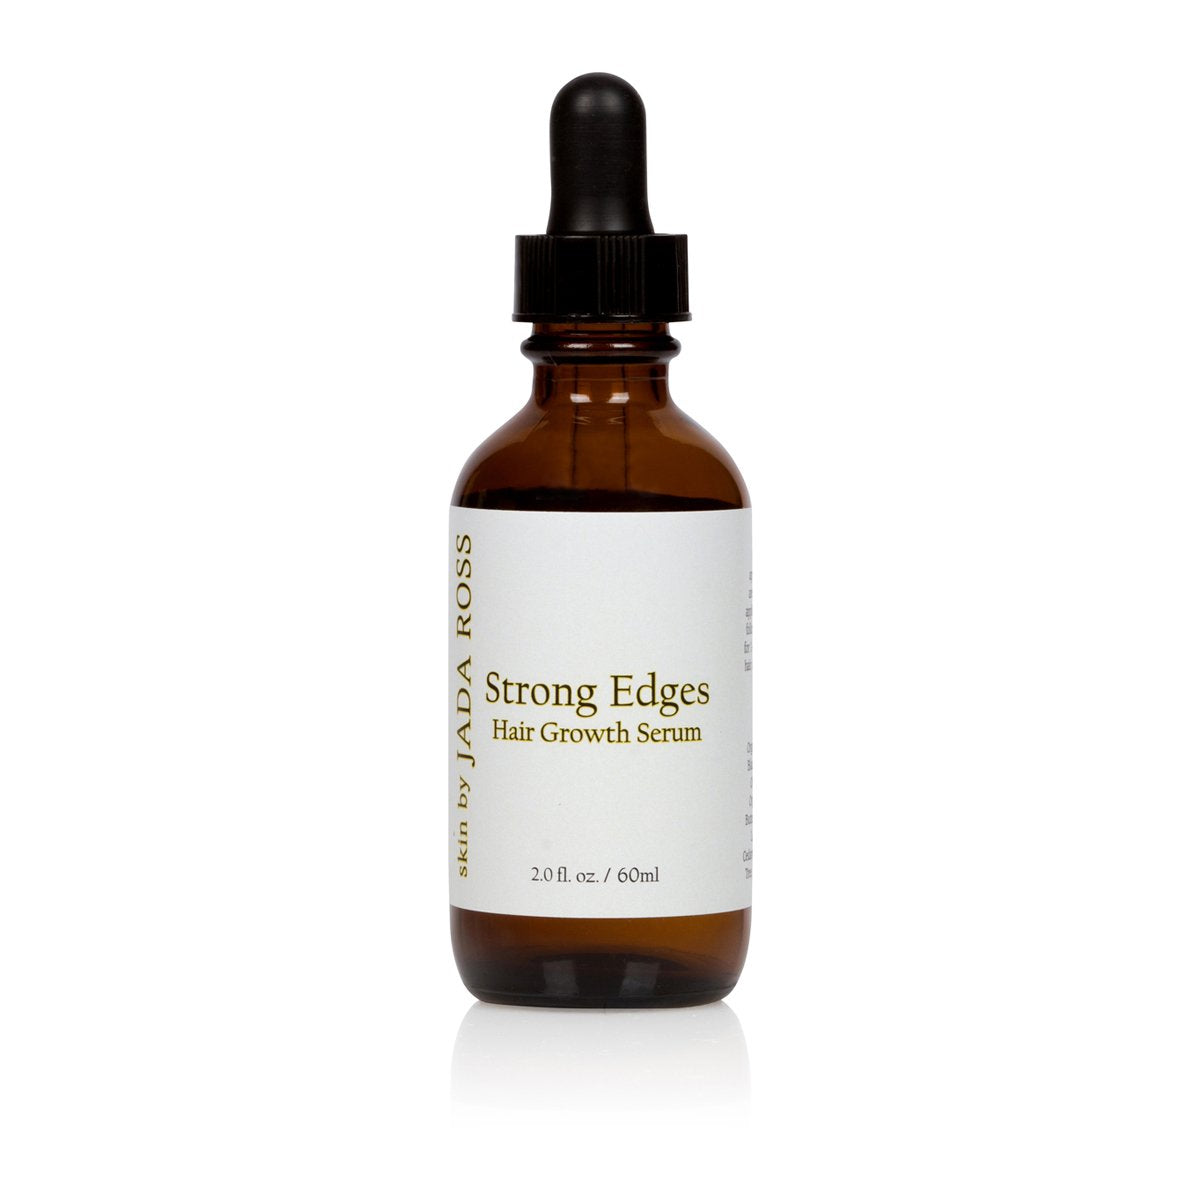 Hair growth serum that promotes stronger edges and long hair.